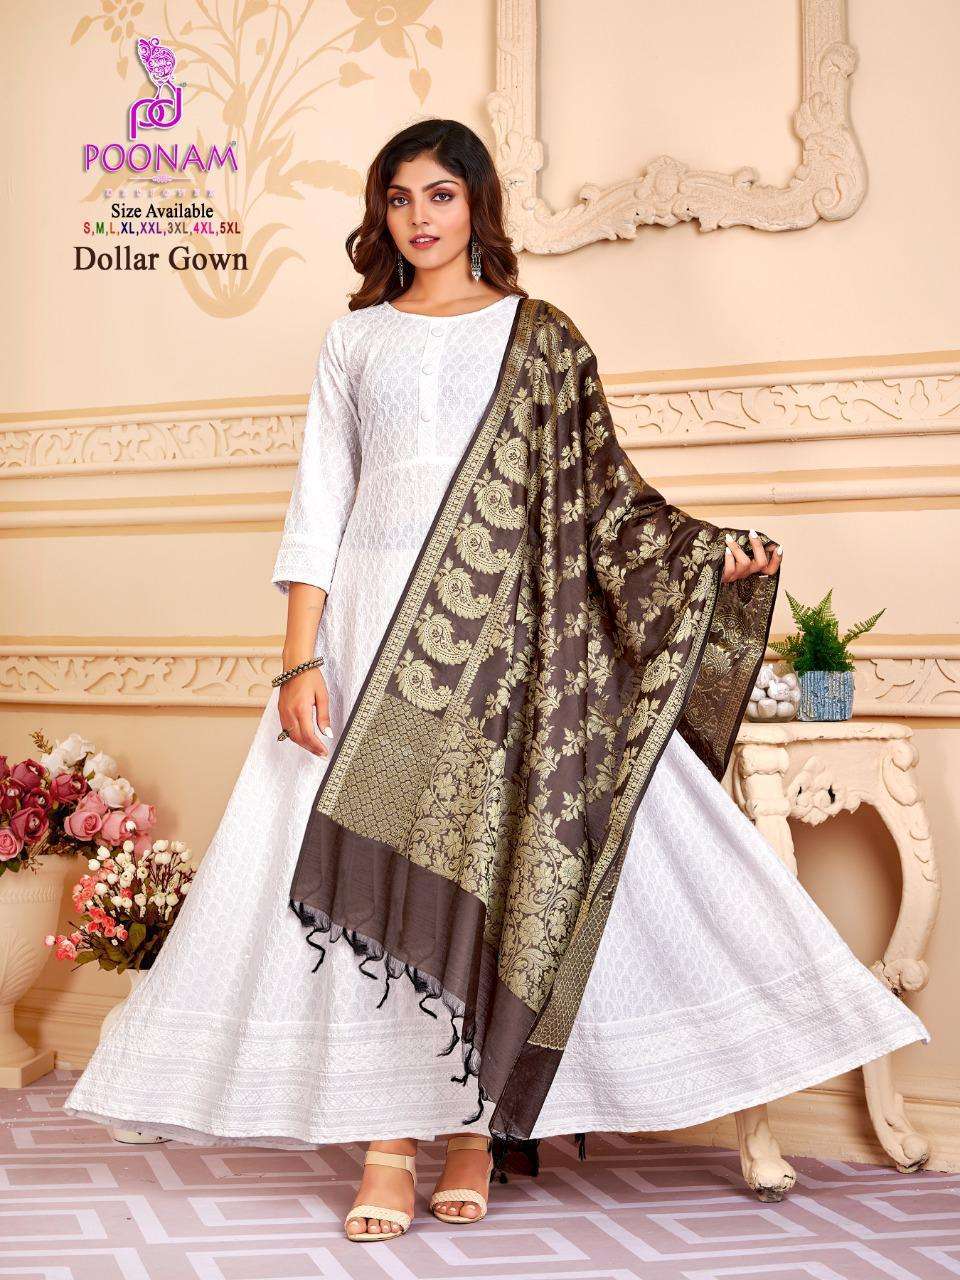 poonam dollar gown series 1001-1006 pure rayon gown with dupatta